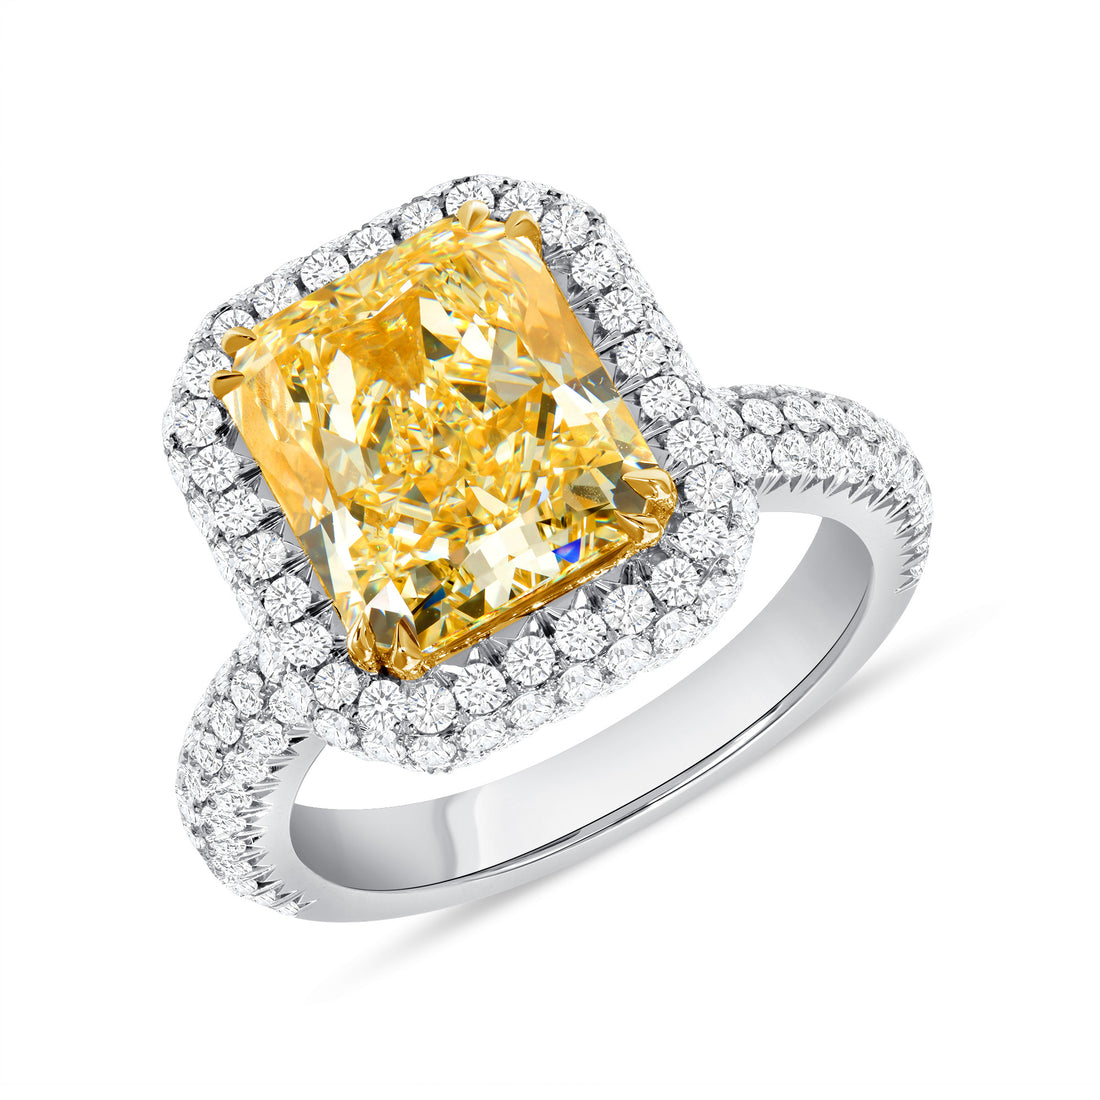 6.33 CT. Radiant Cut WX Yellow Diamond and Round Brilliant Diamond Ring in 18K Yellow Gold and Platinum